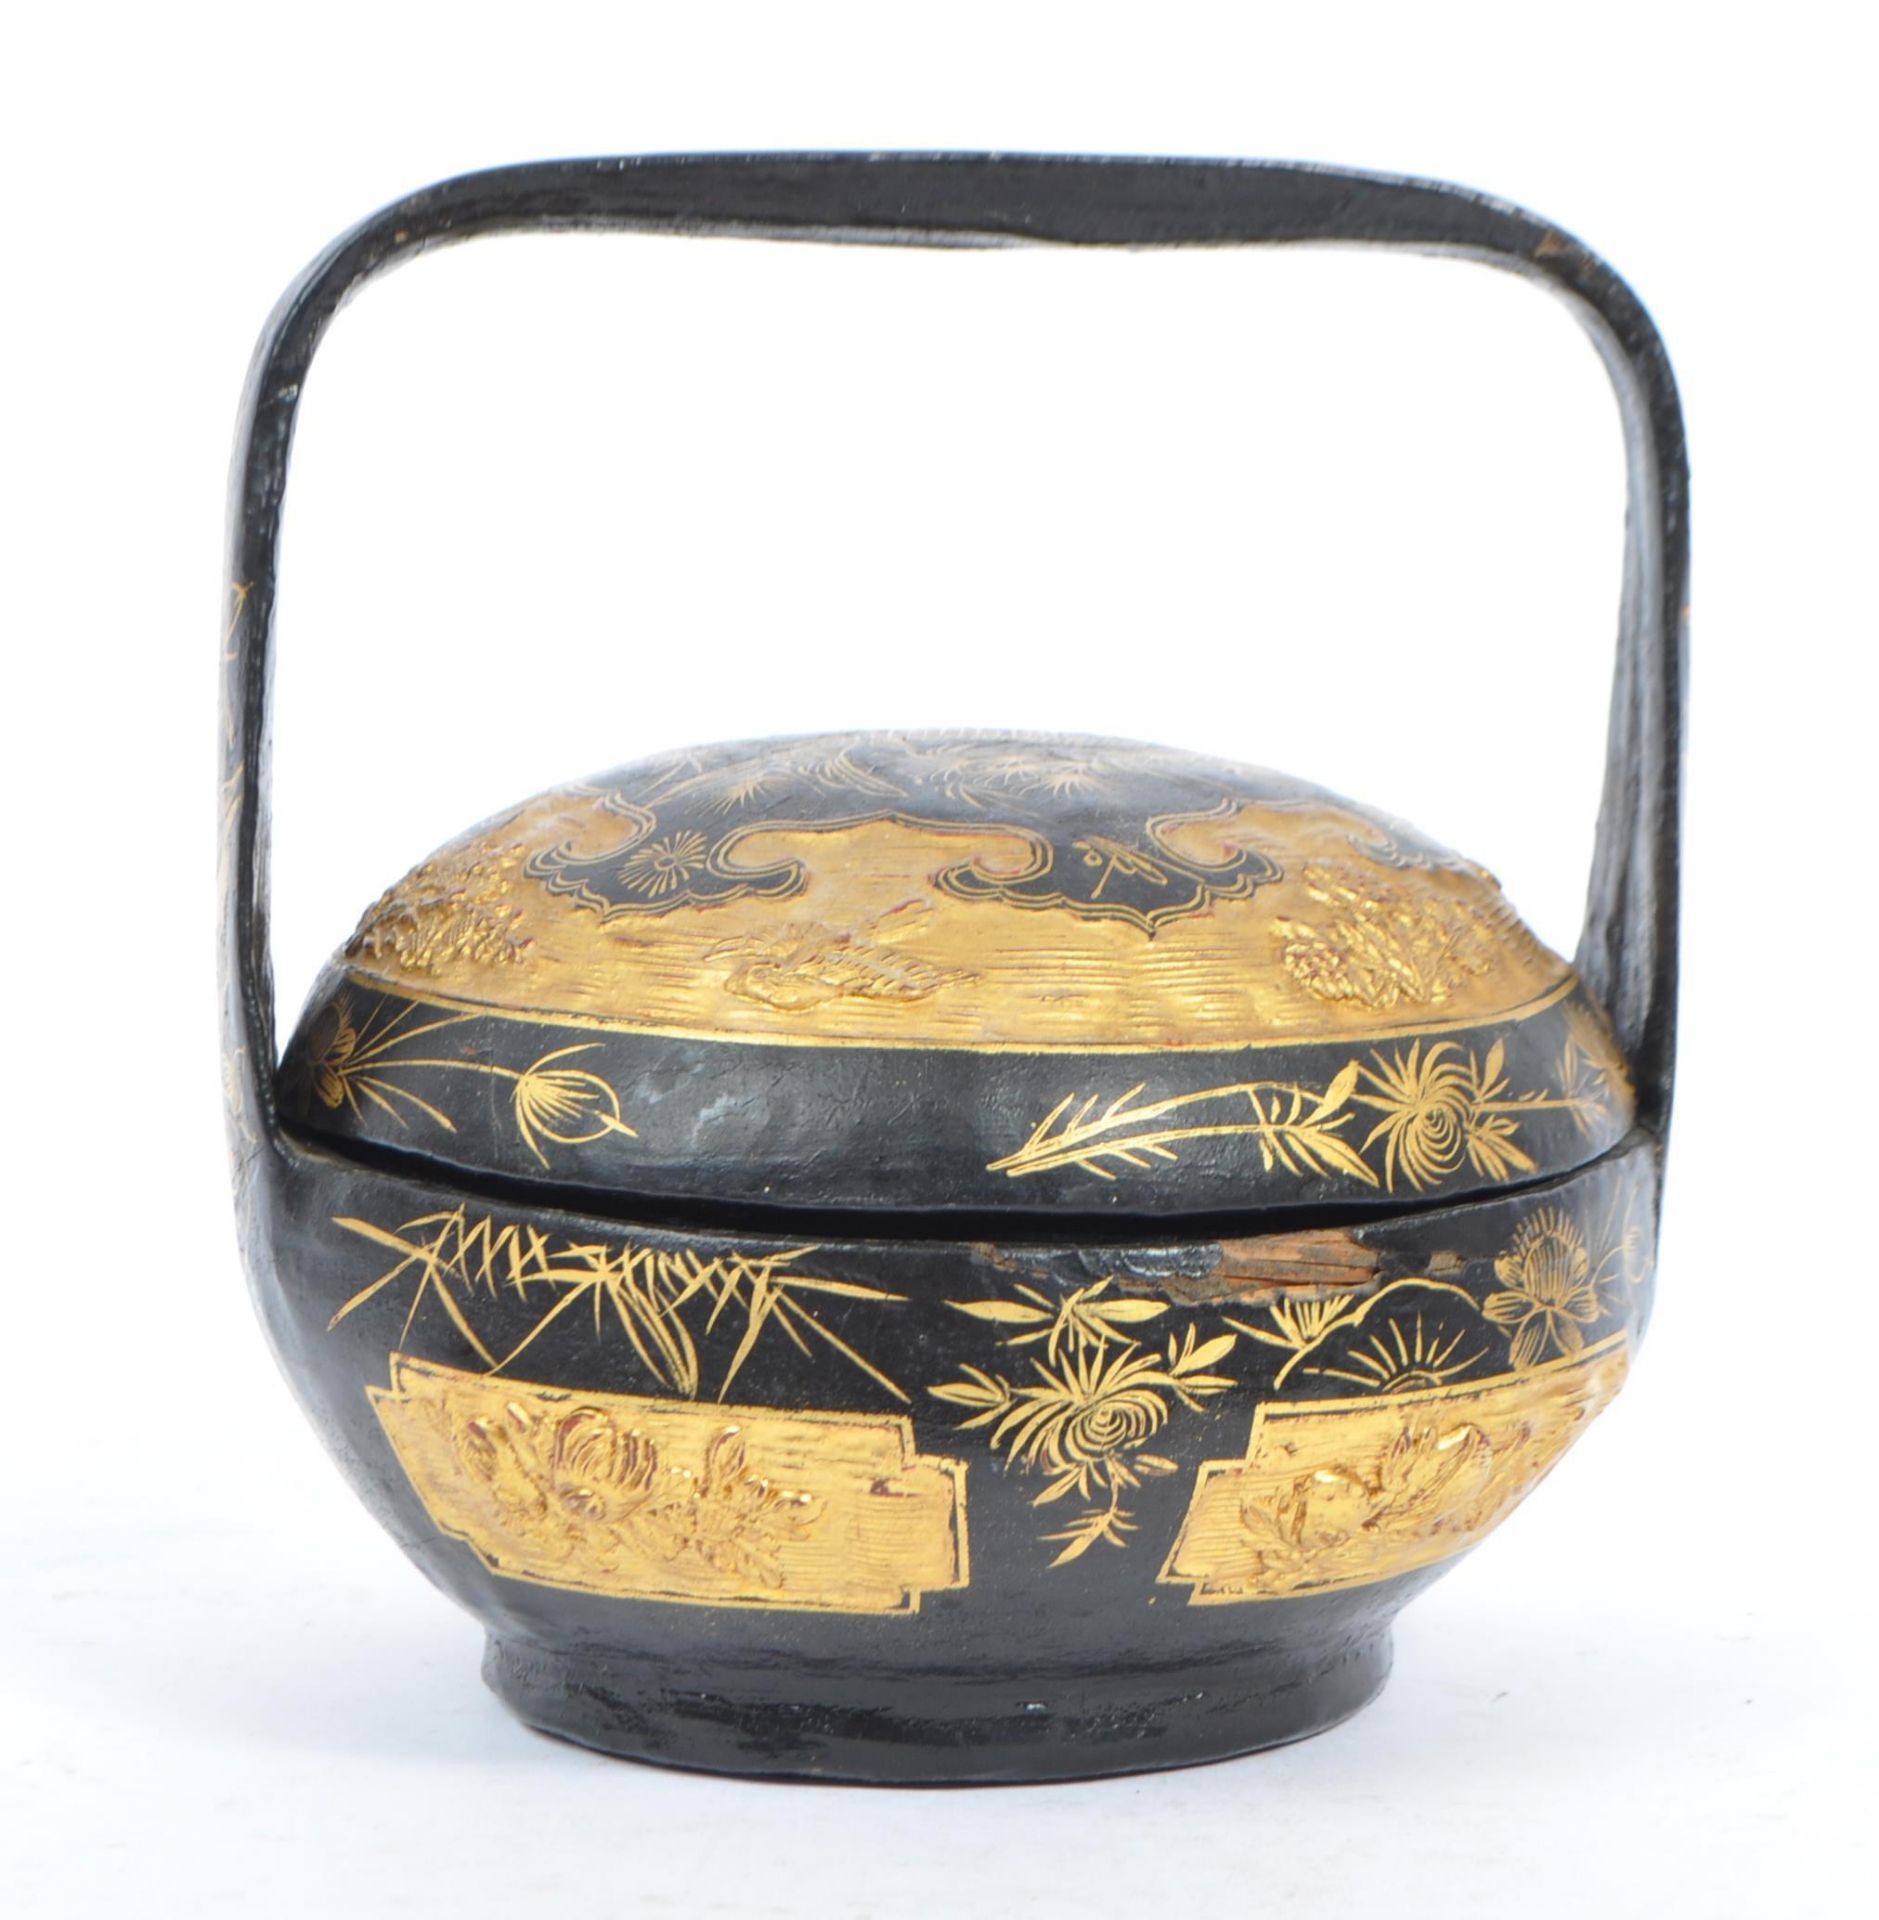 EARLY 20TH CENTURY 1920S CHINESE LAQUERED WEDDING BASKET - Image 3 of 7